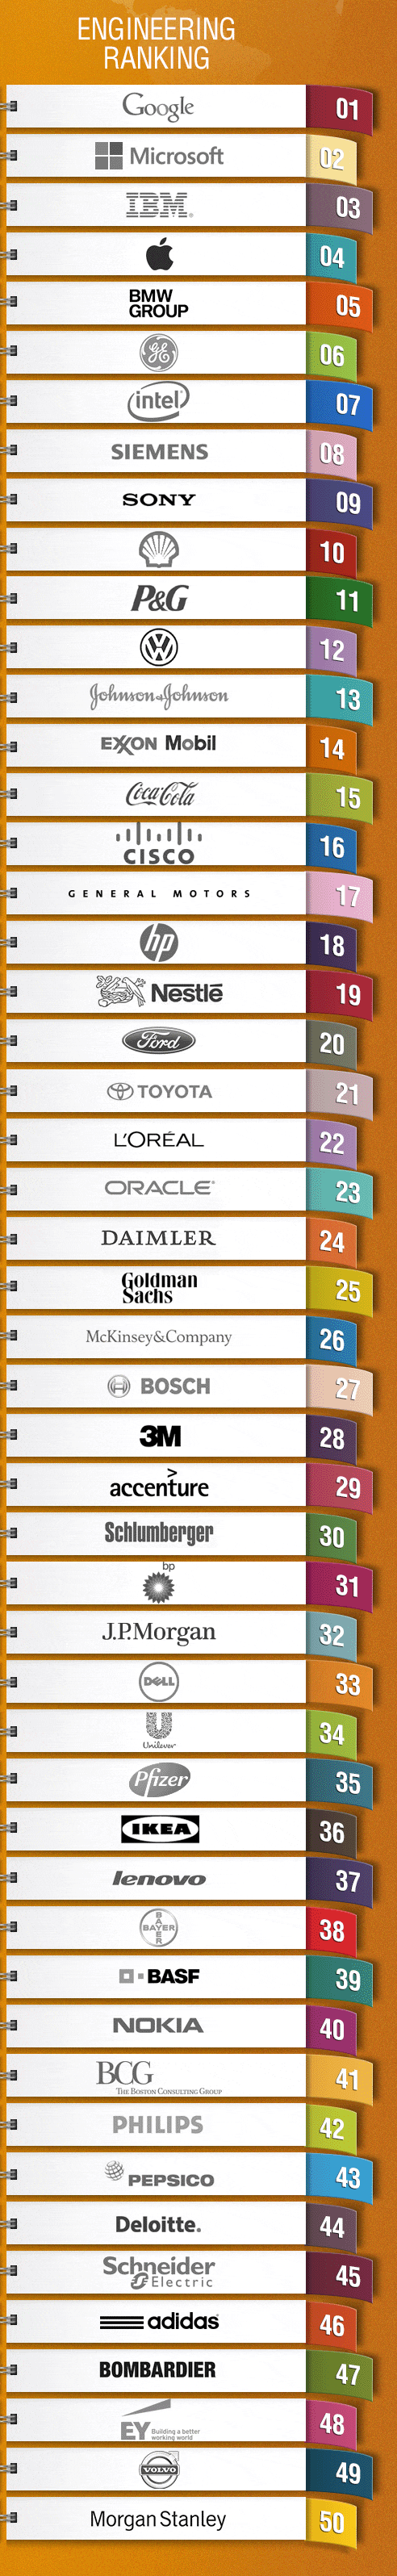 Worlds Most Attractive Engineering Employers 2013